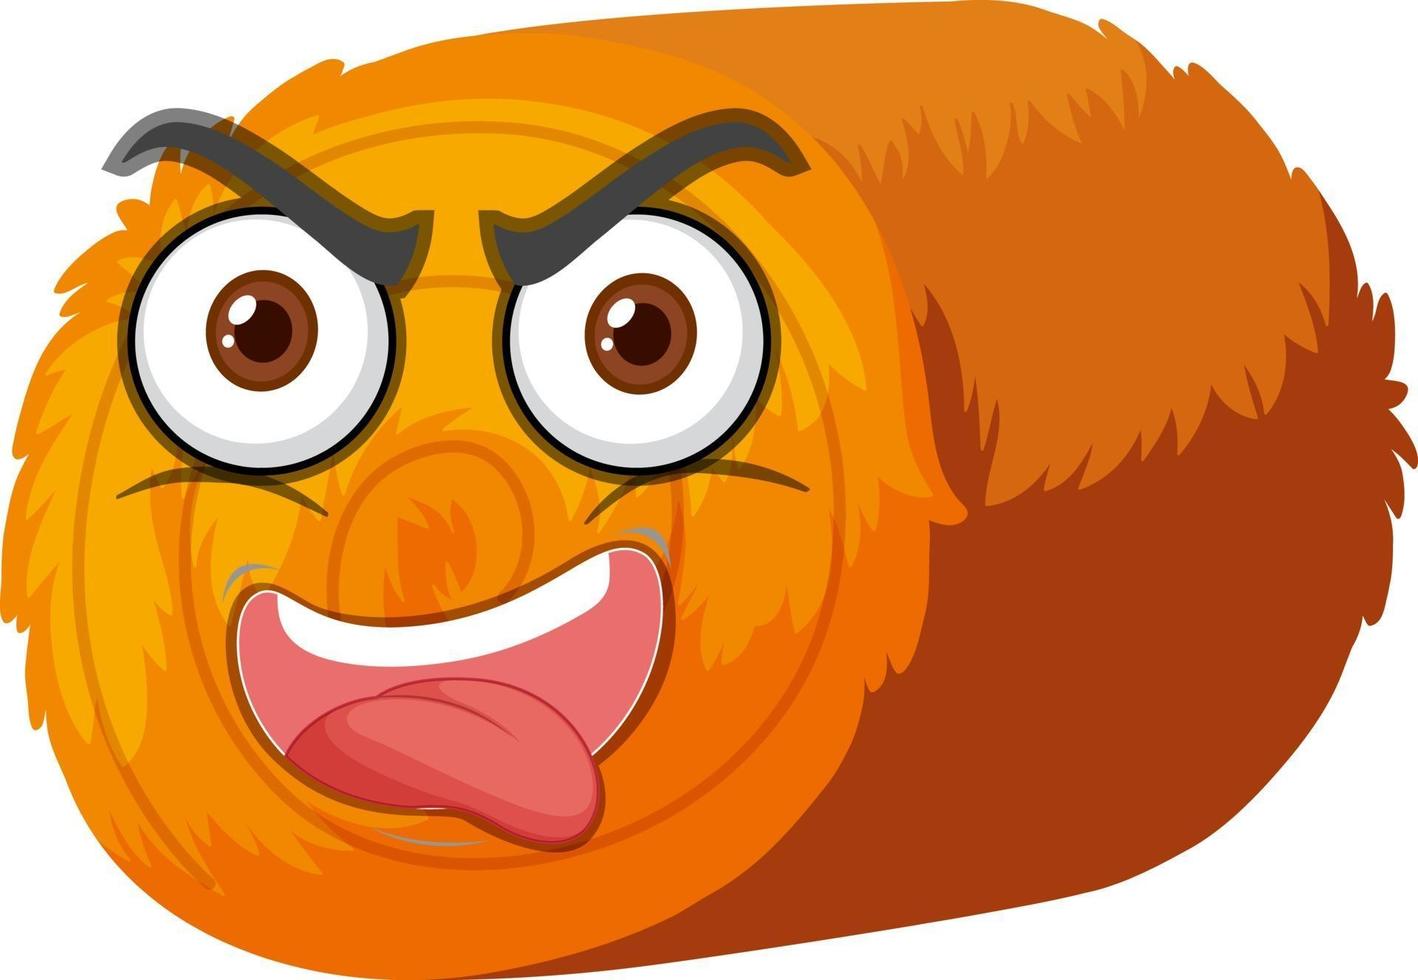 Round hay bale cartoon character with facial expression vector